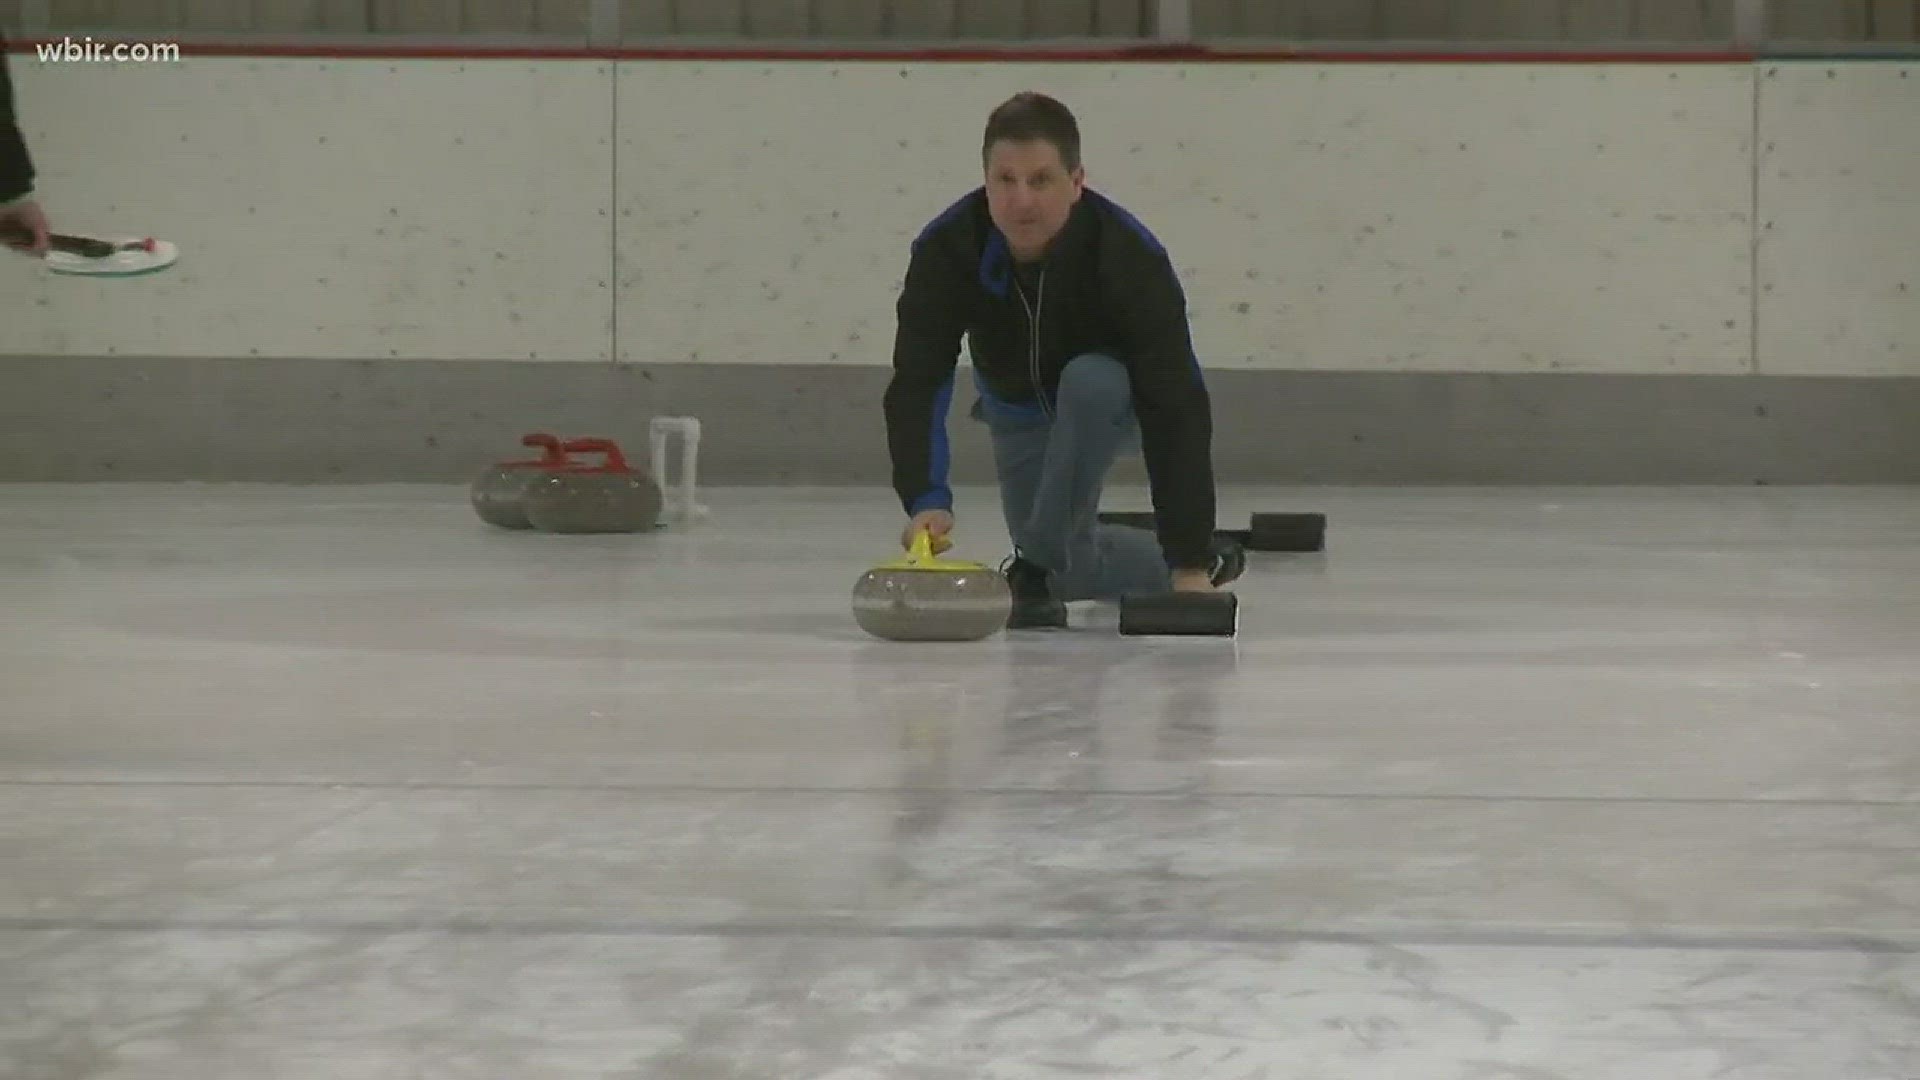 If you've been watching curling on the Olympics, you might wonder what the sweeping is about. Jeff Bunn from the Great Smoky Moutains Curling Club explains it for us.